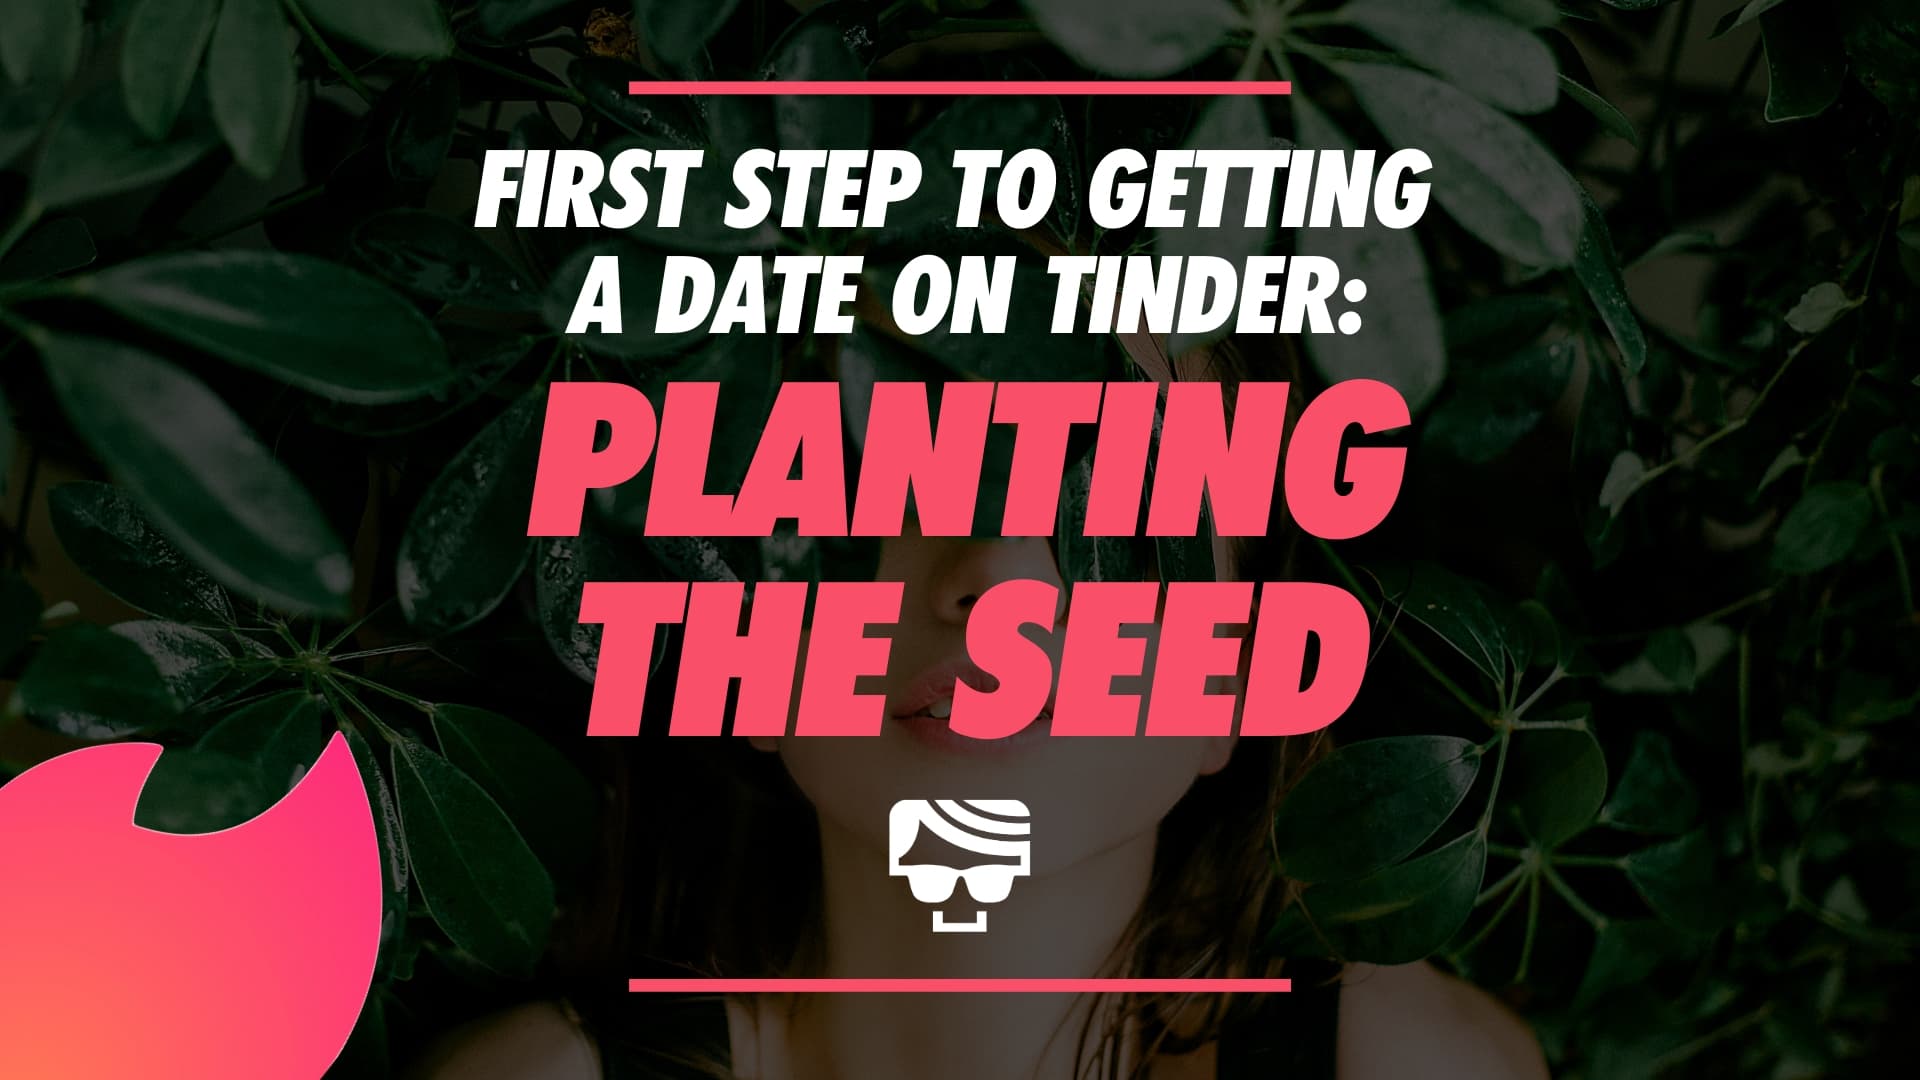 You Must Do This Before Asking A Girl Out Online: Plant The Seed